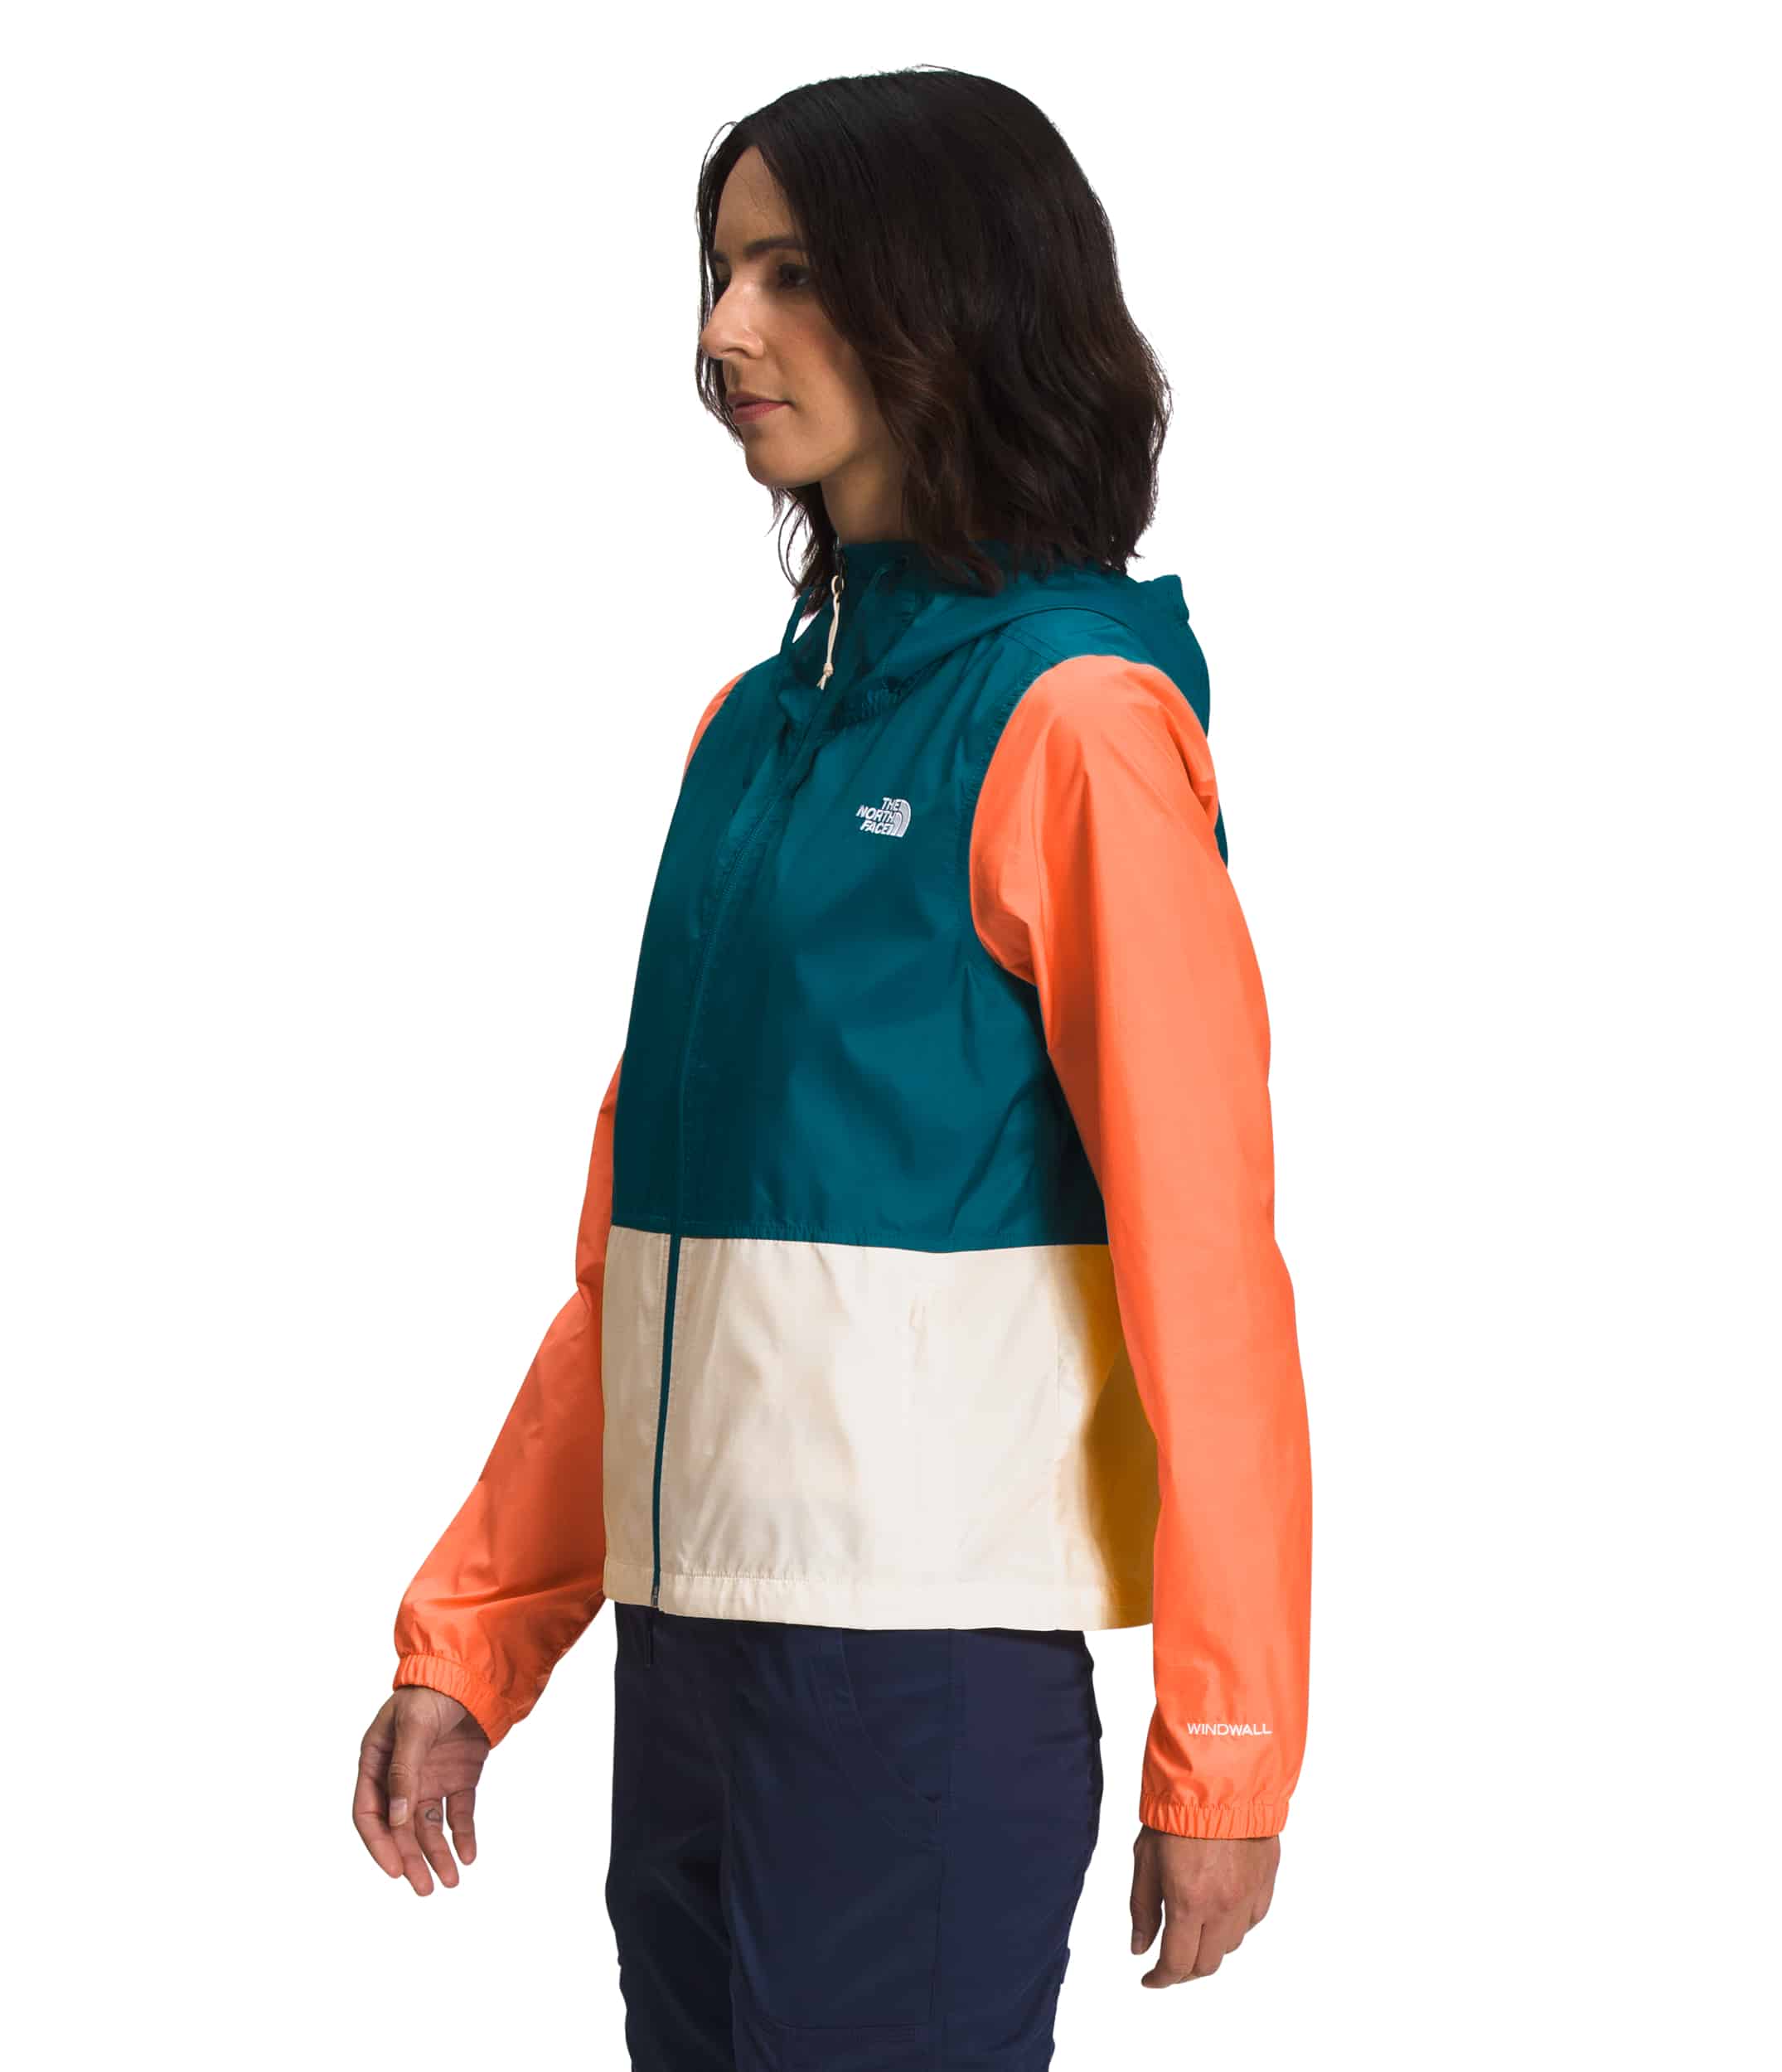 MANTEAU COUPE-VENT THE NORTH FACE FEMME, CYCLONE NF0A82R7 MAHEU GO SPORT